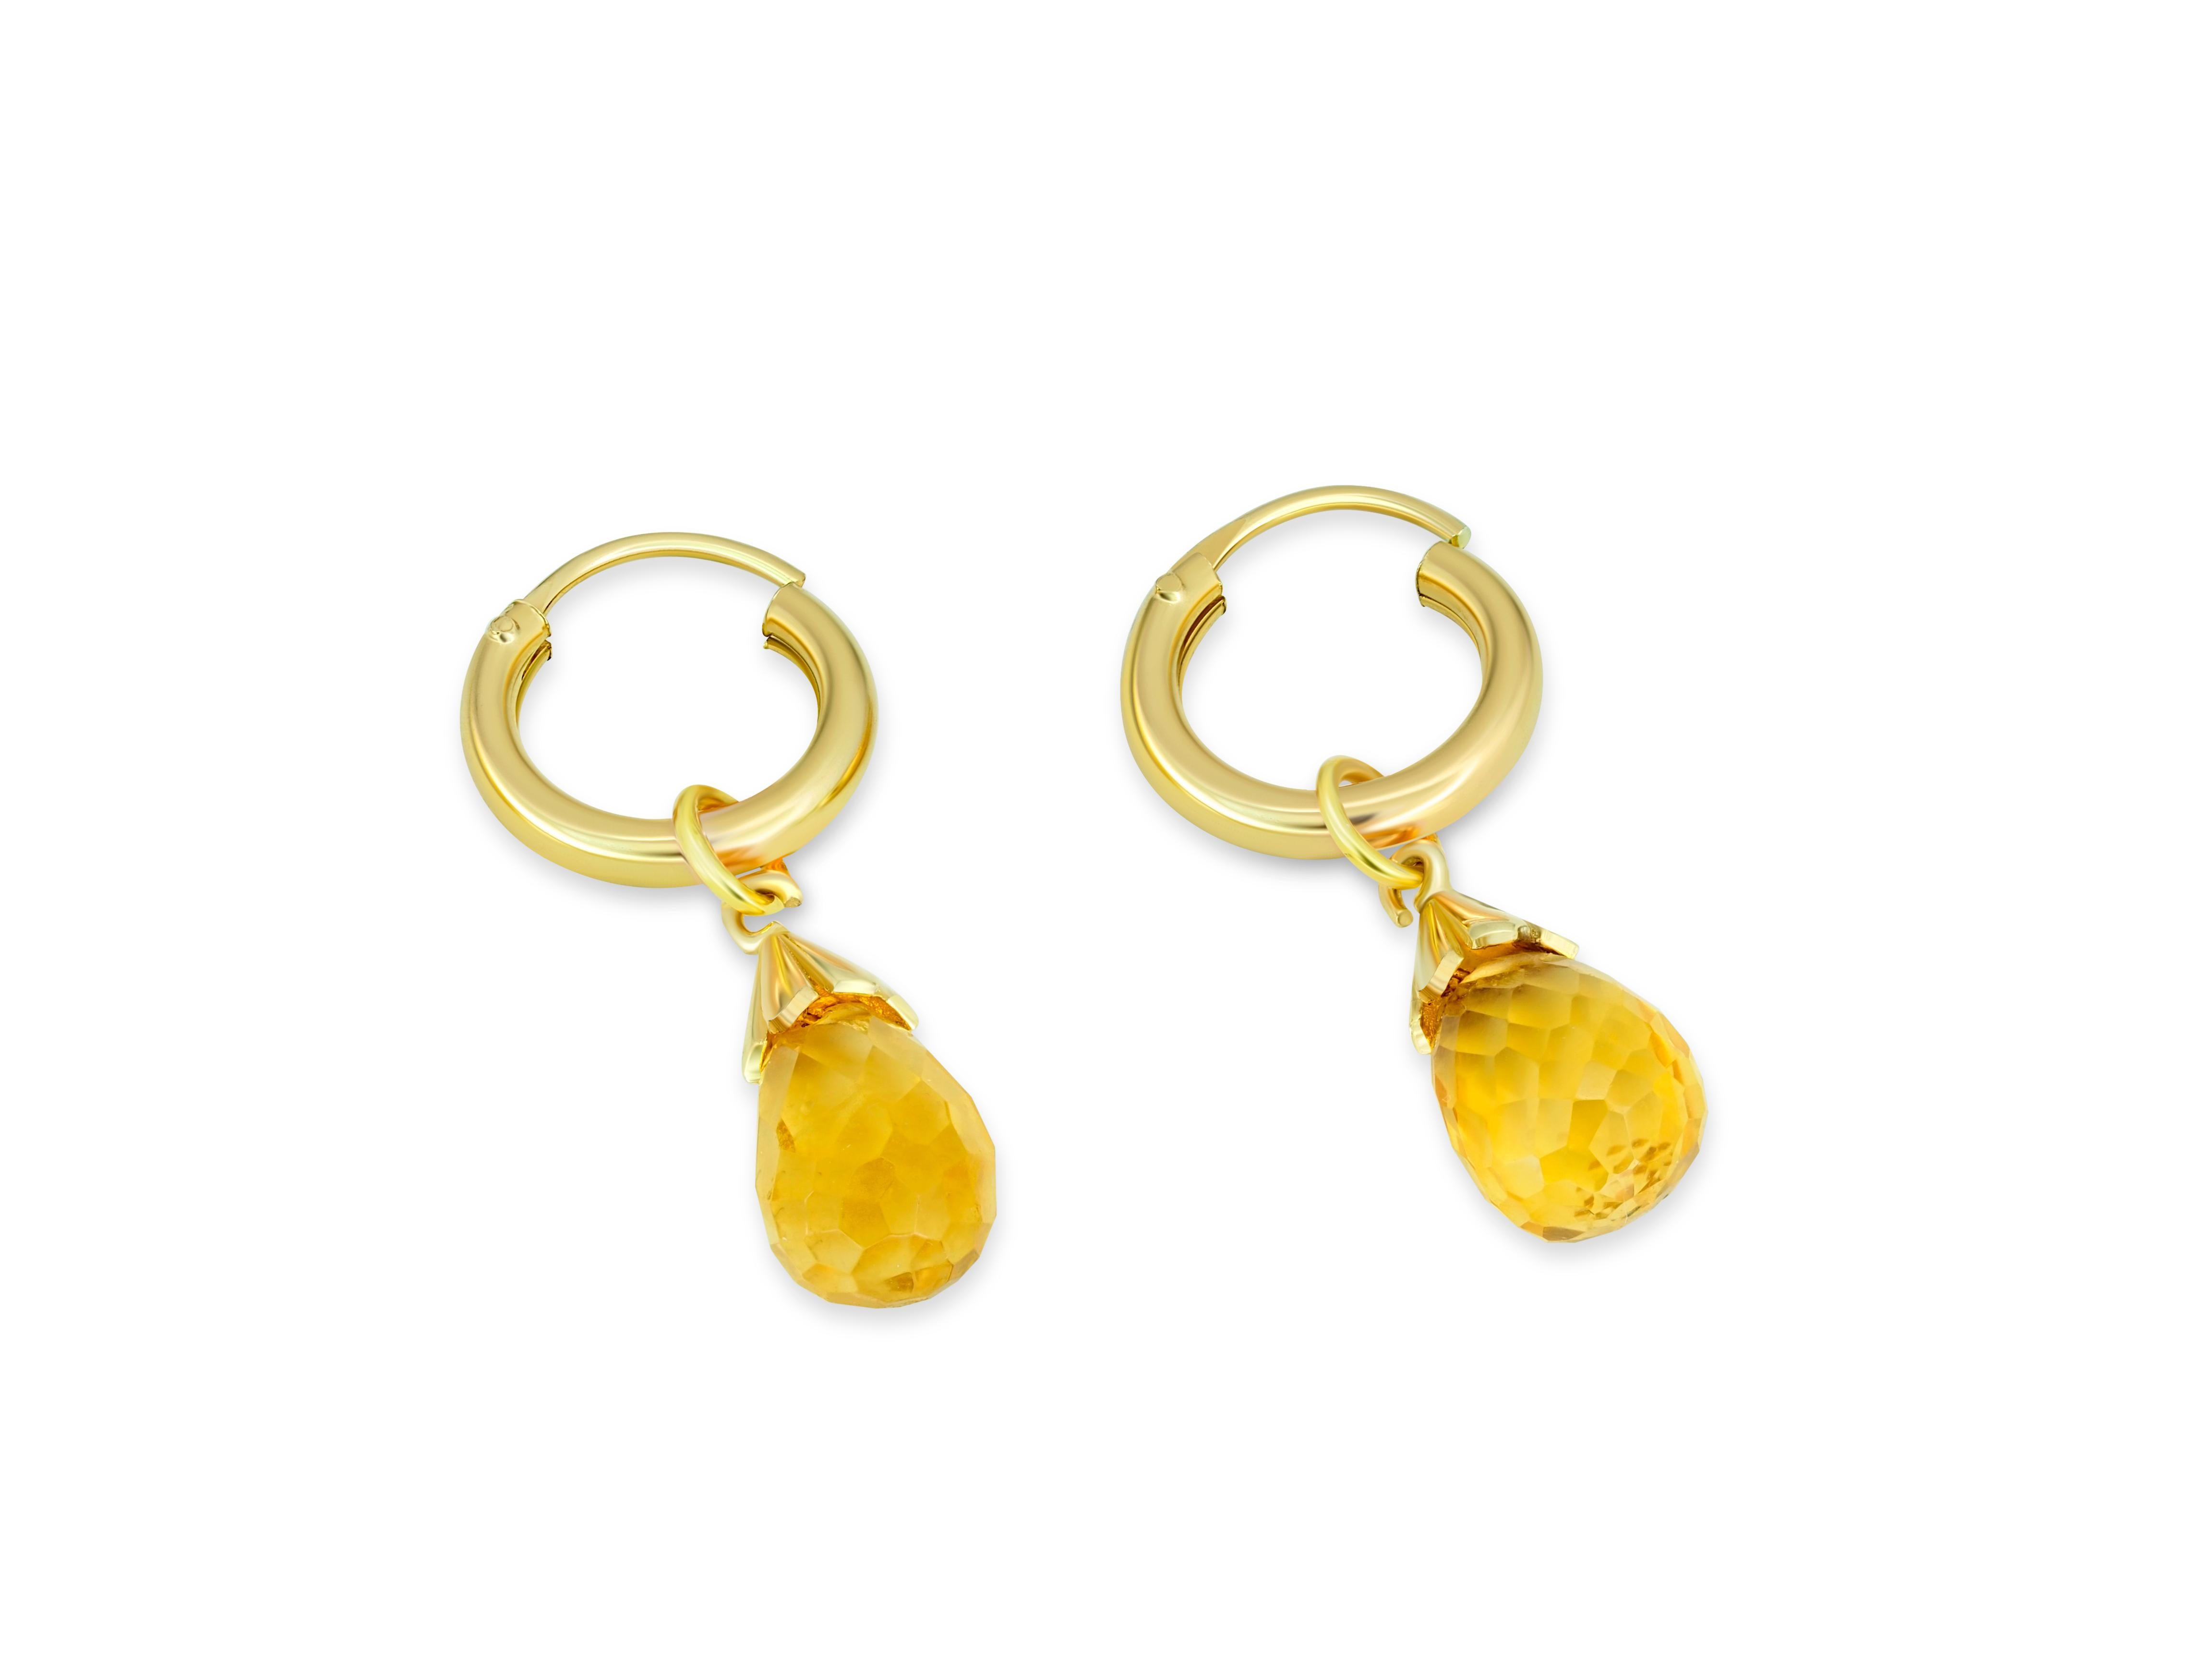 Citrine huggy hoop earrings. Danity hoops in 14k gold. 2 ways wearrable earrings. Citrine Briolette Drop Hoop  Earrings in 14k Gold. Hoop earrings and citrine briolette charms. 

Hoops earrings can be worn separately without briolettes and with